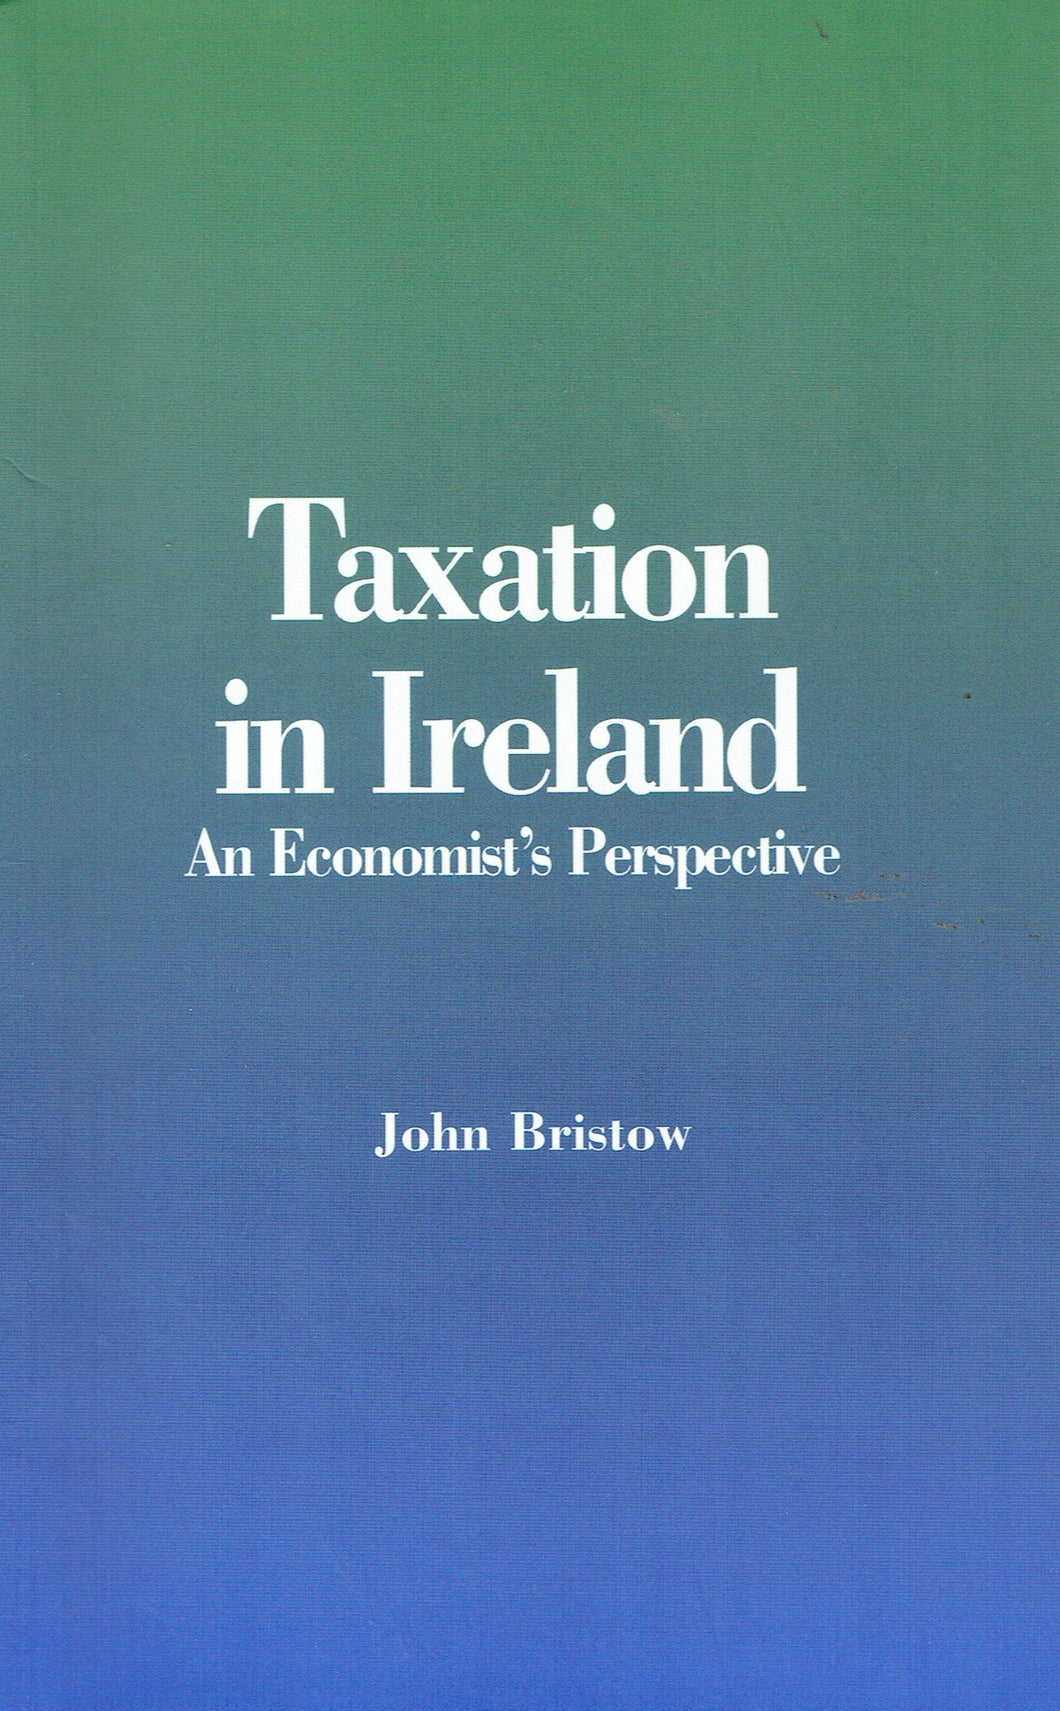 Taxation in Ireland: An Economist's Perspective